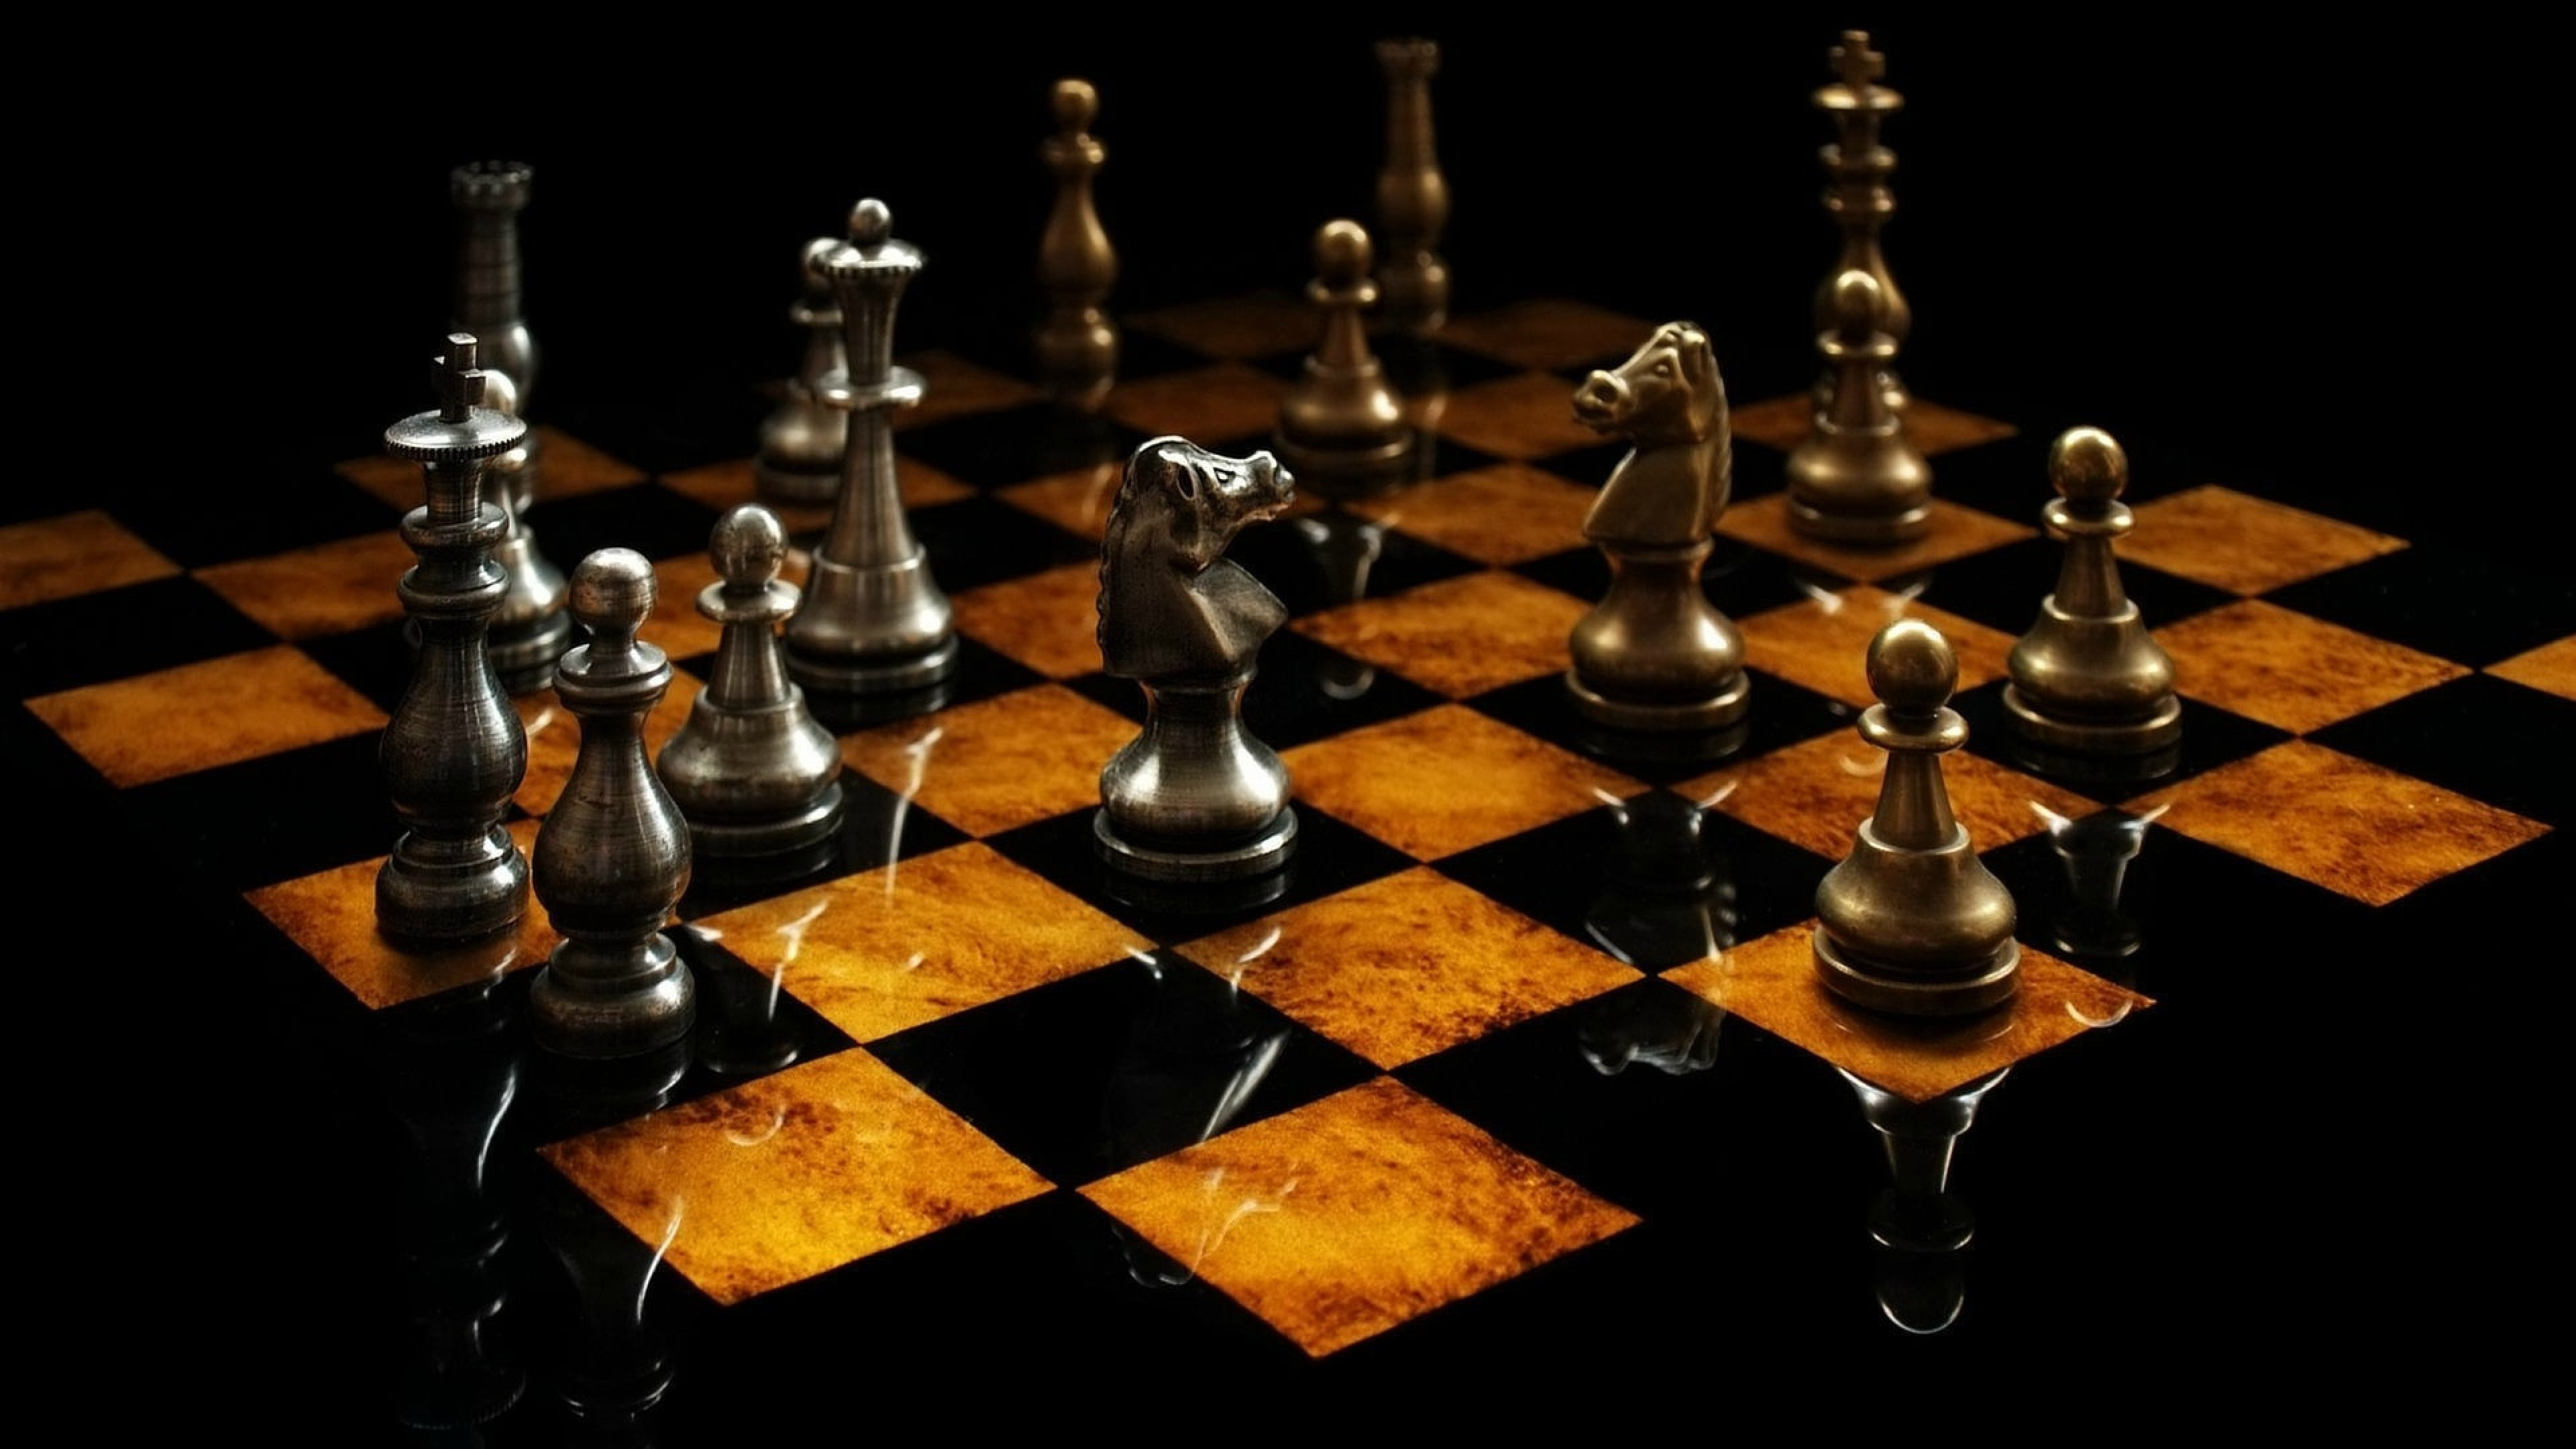 Download chess board wallpapers, UHD TV, Sports, Mind game, 3840x2160 4K Desktop